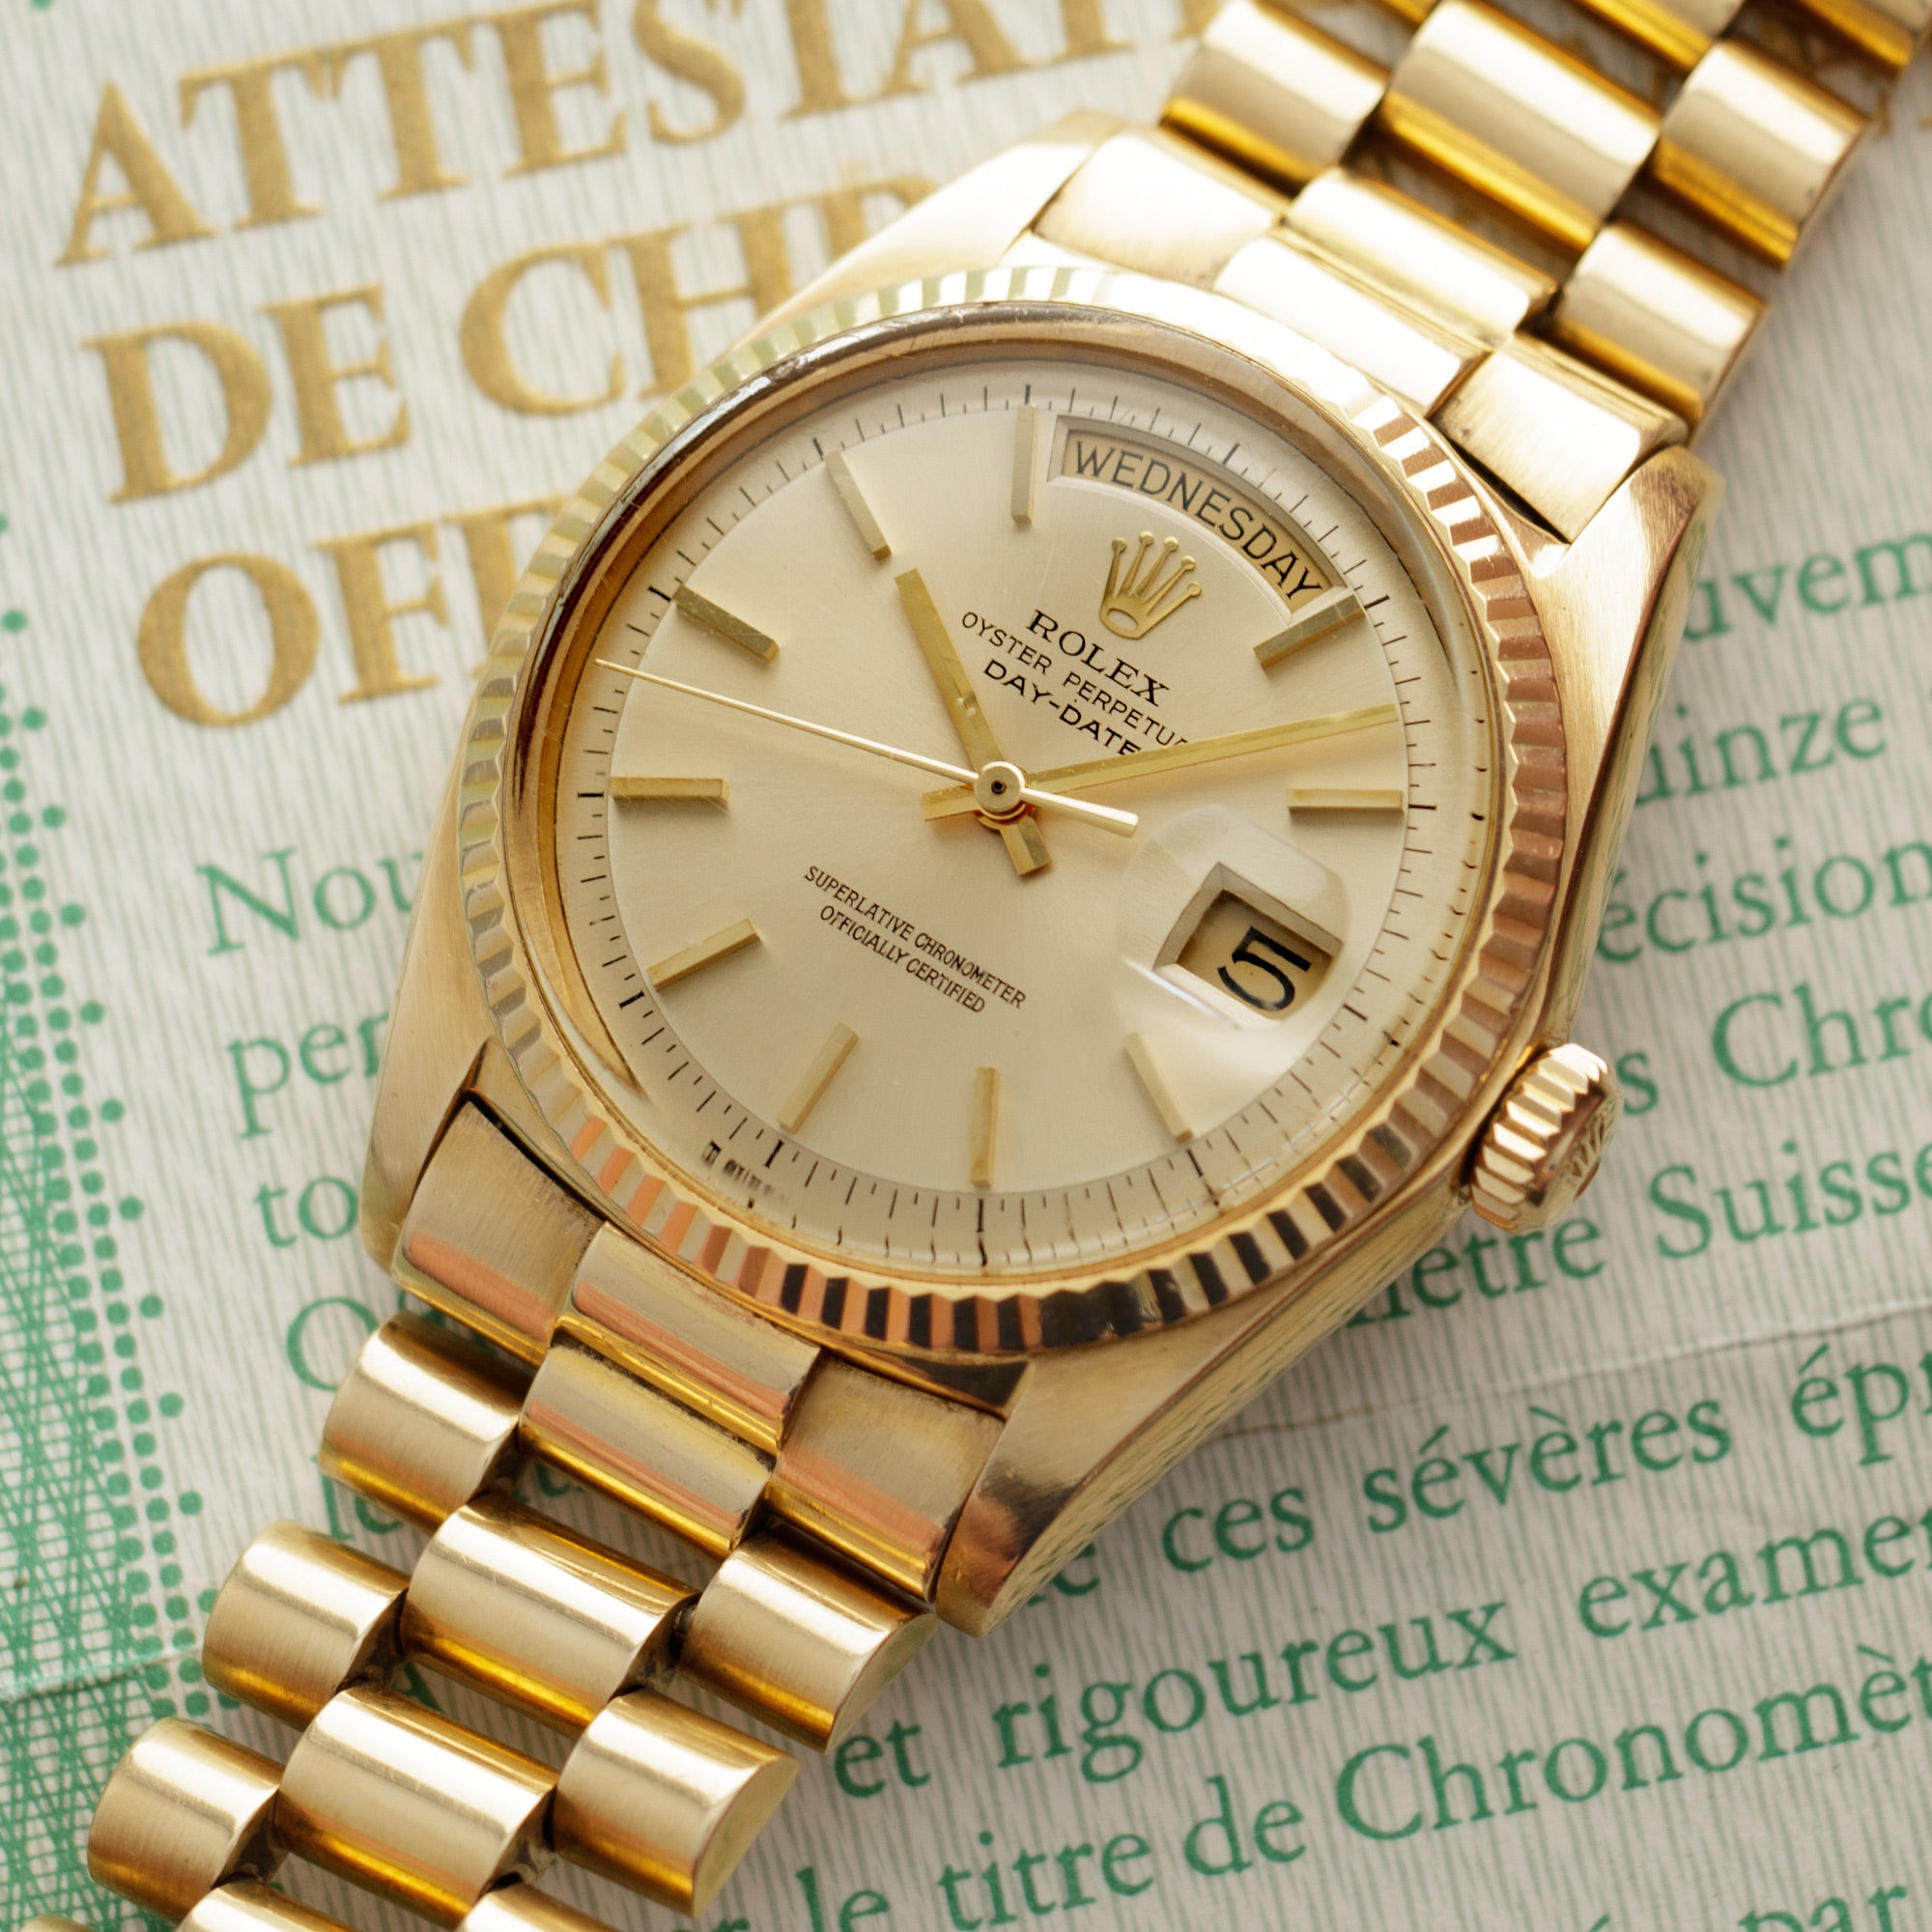 Rolex - Rolex Yellow Gold Day-Date Ref. 1803 with Original Paperwork - The Keystone Watches